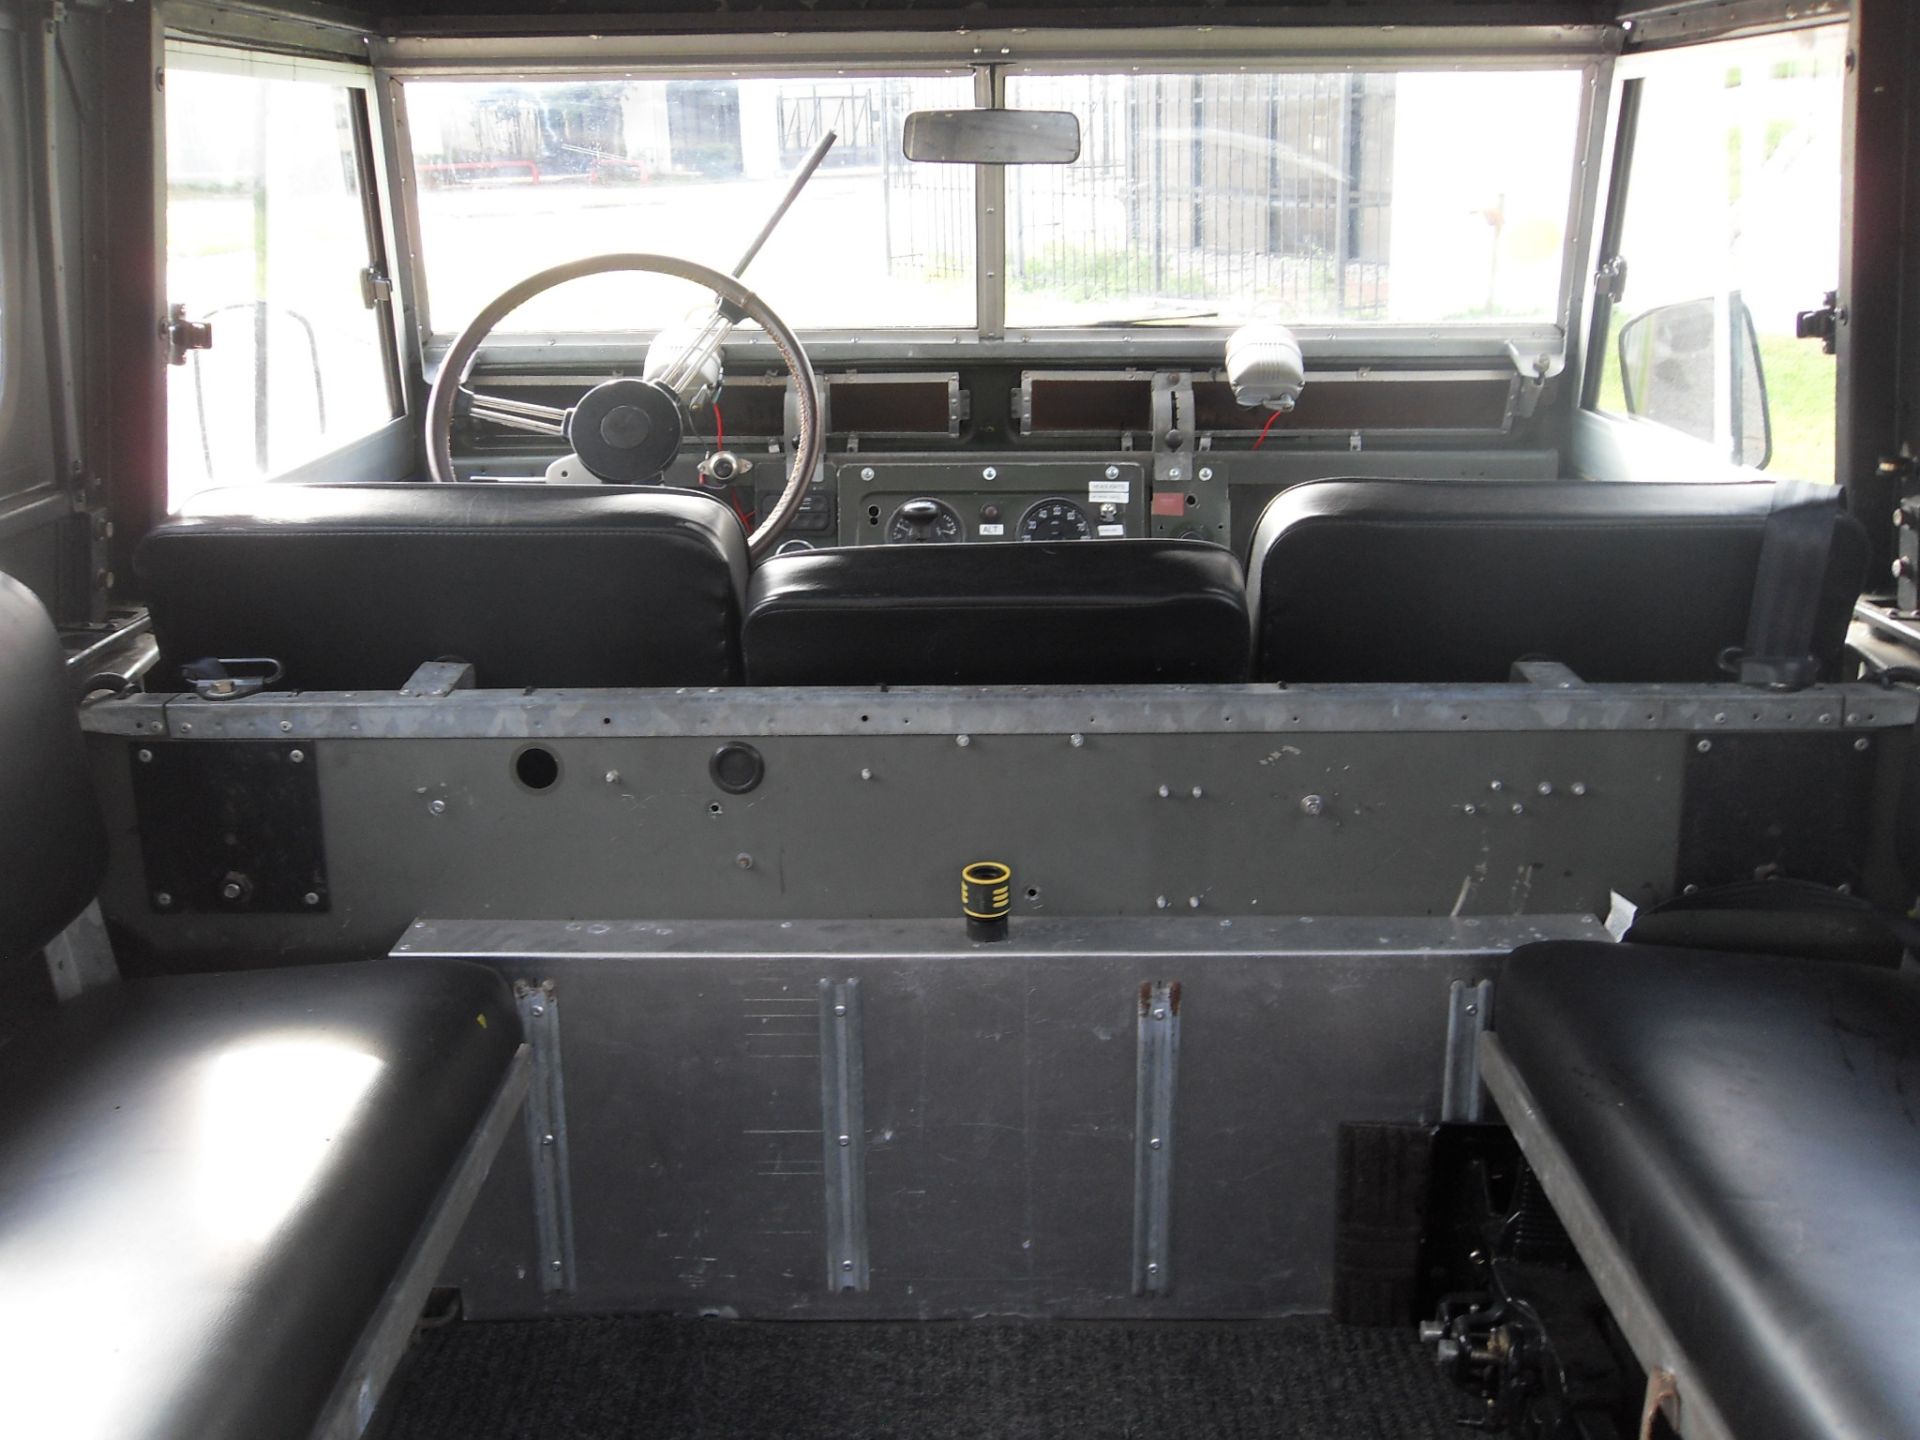 1965 Land Rover Series 2A Wagon - Image 25 of 28